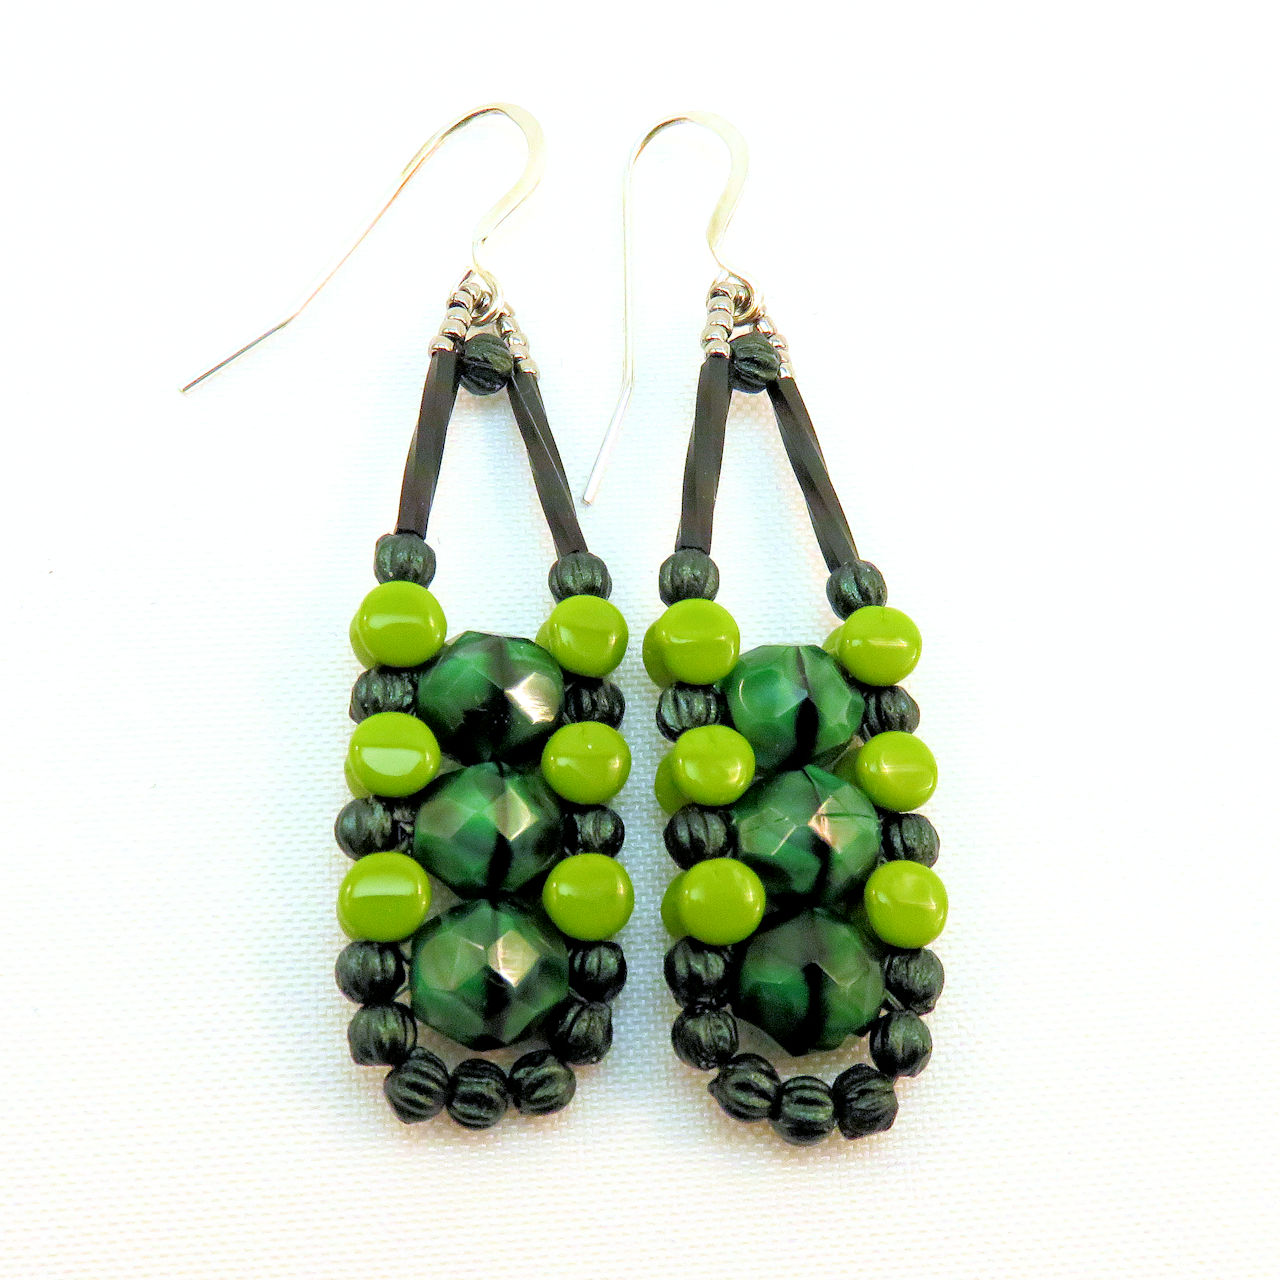 Long earrings in different shades of green with silver accents and ear wires on a white background. There are three swirled medium green beads stacked vertically in the center of these beads, like peas, surrounded by an outline of dark metallic green and avocado green beads.